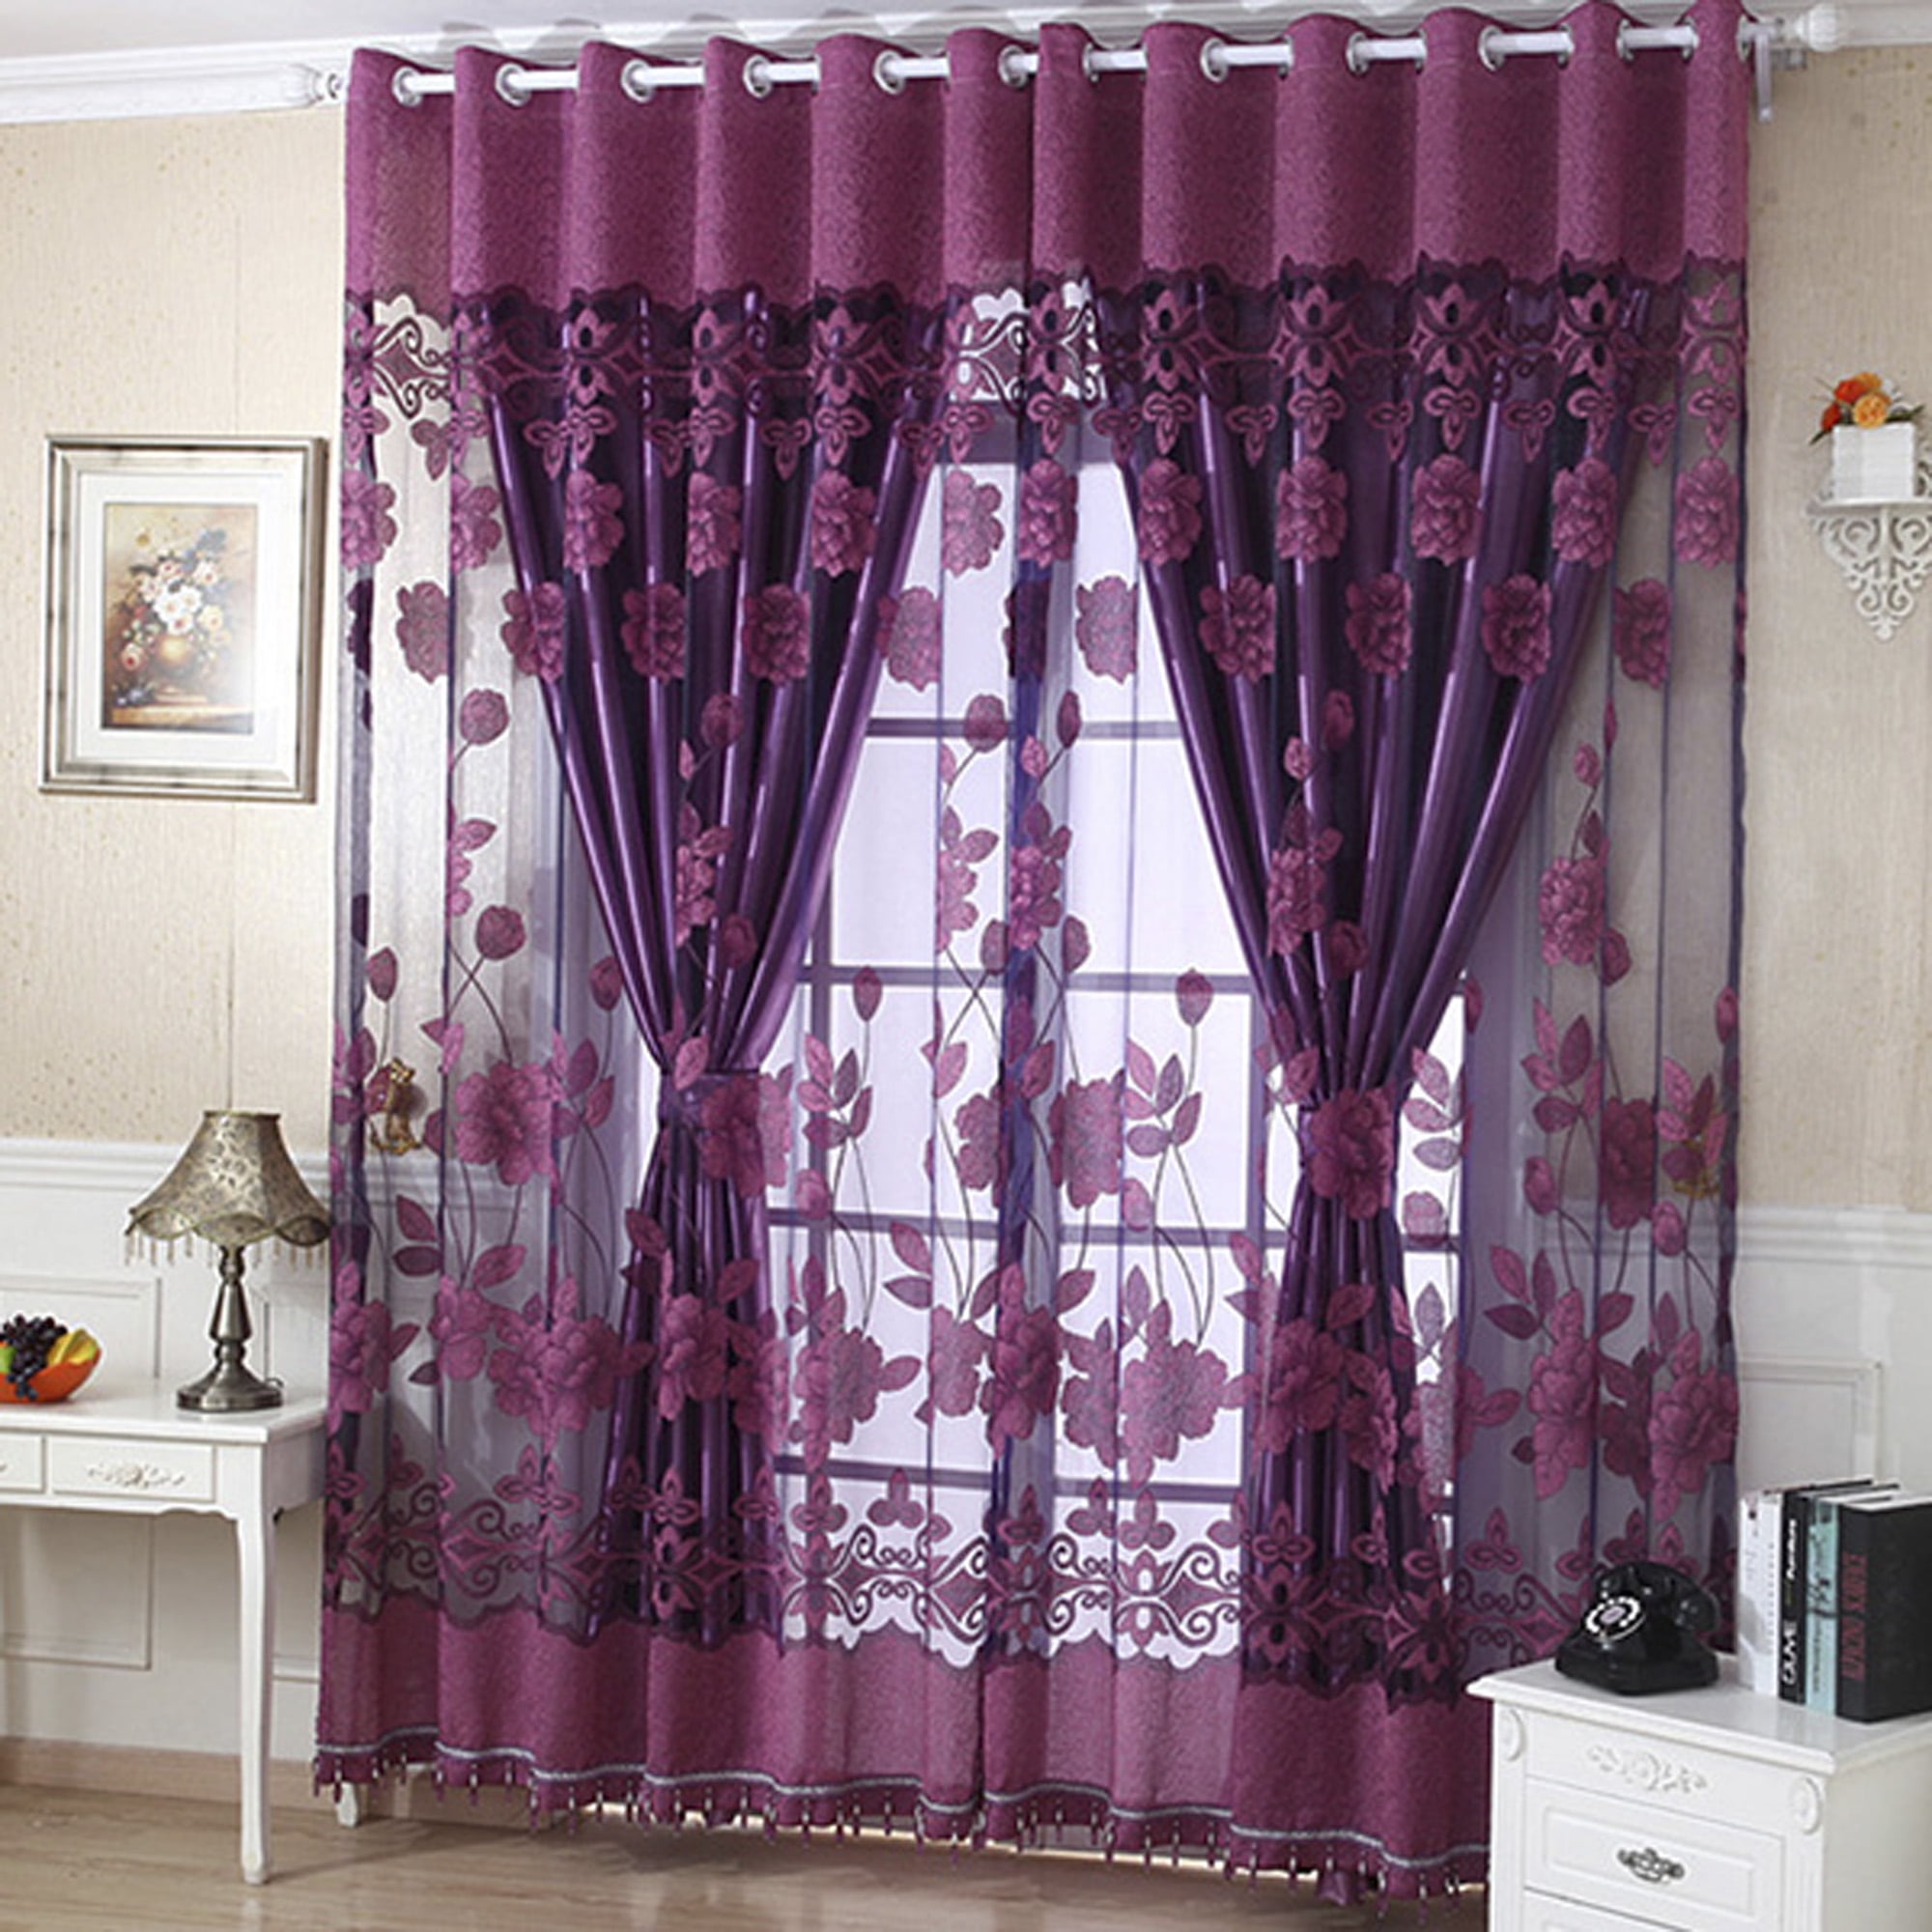 Living Room Curtains Floral Tulle Door Window Curtain Drape Panel Sheer Valances